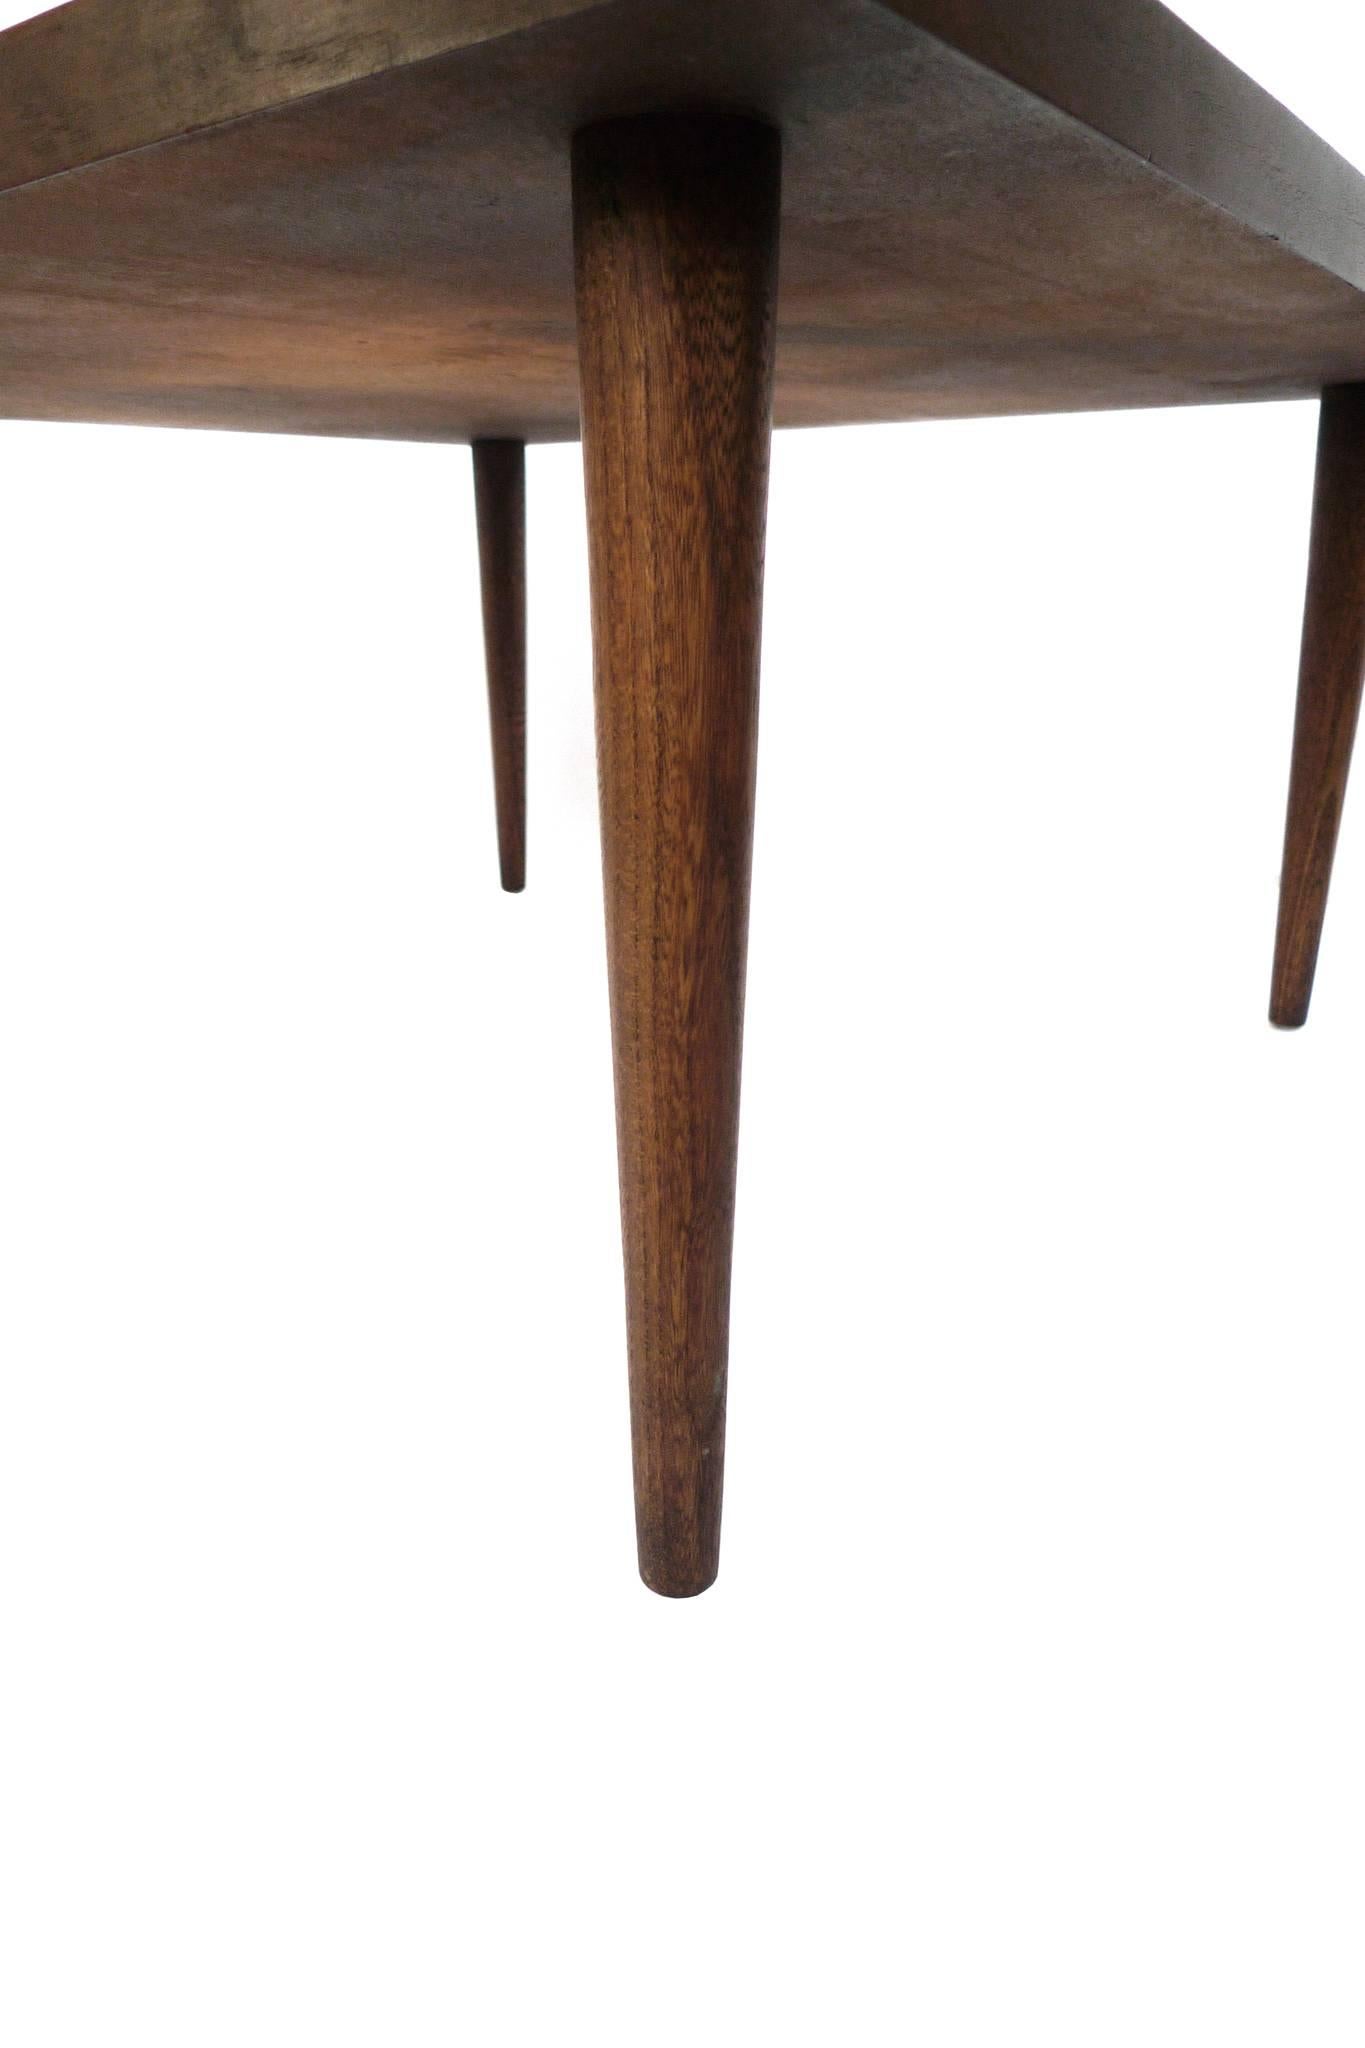 Mid-Century Modern Midcentury Walnut Cocktail Table by Merton Gershun for American of Martinsville